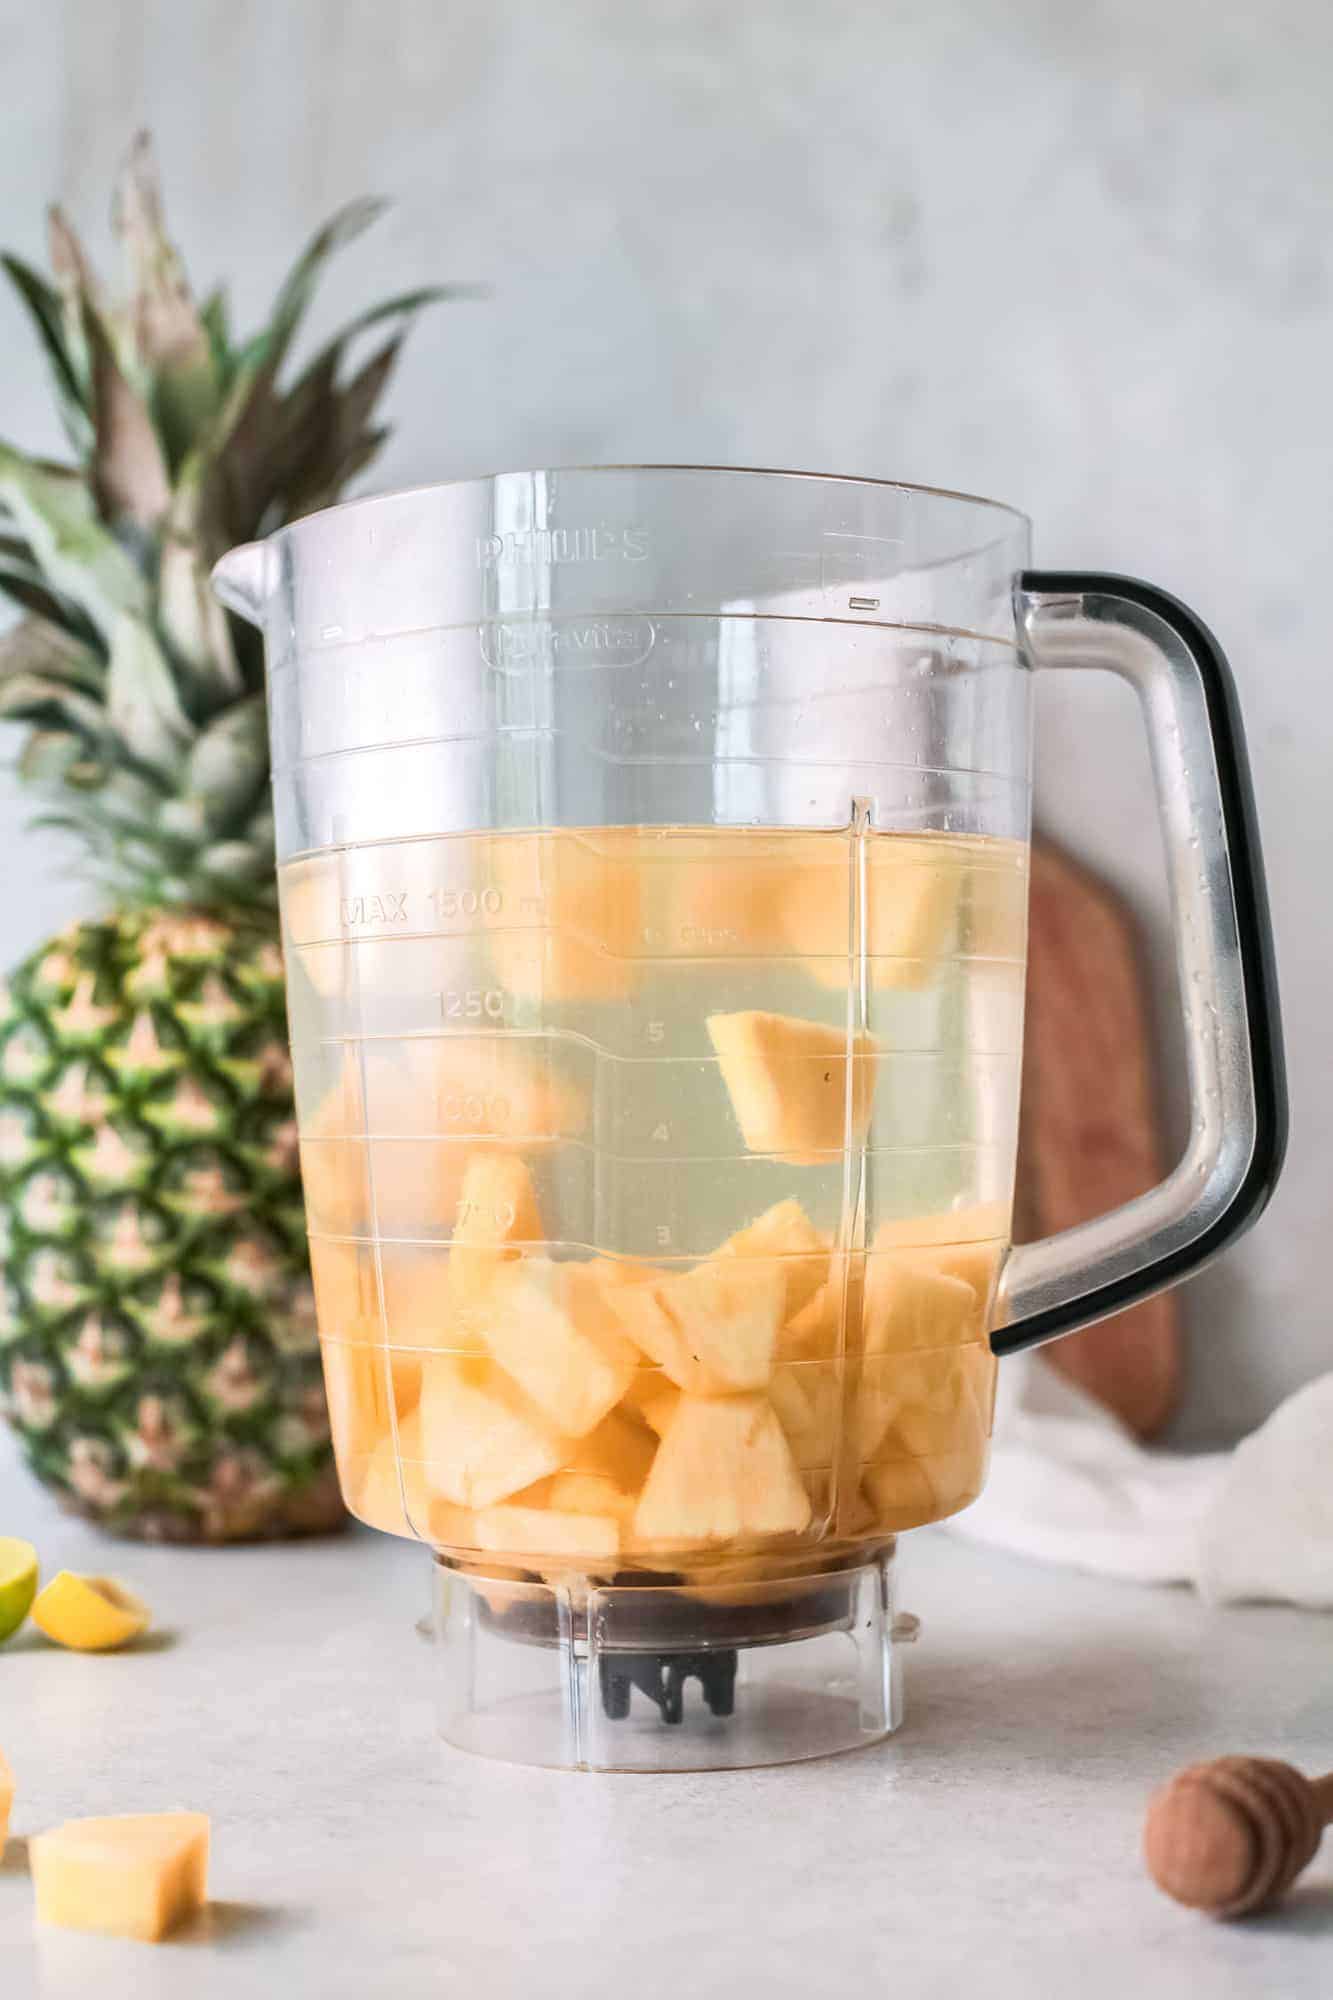 Pineapple and water in a blender.